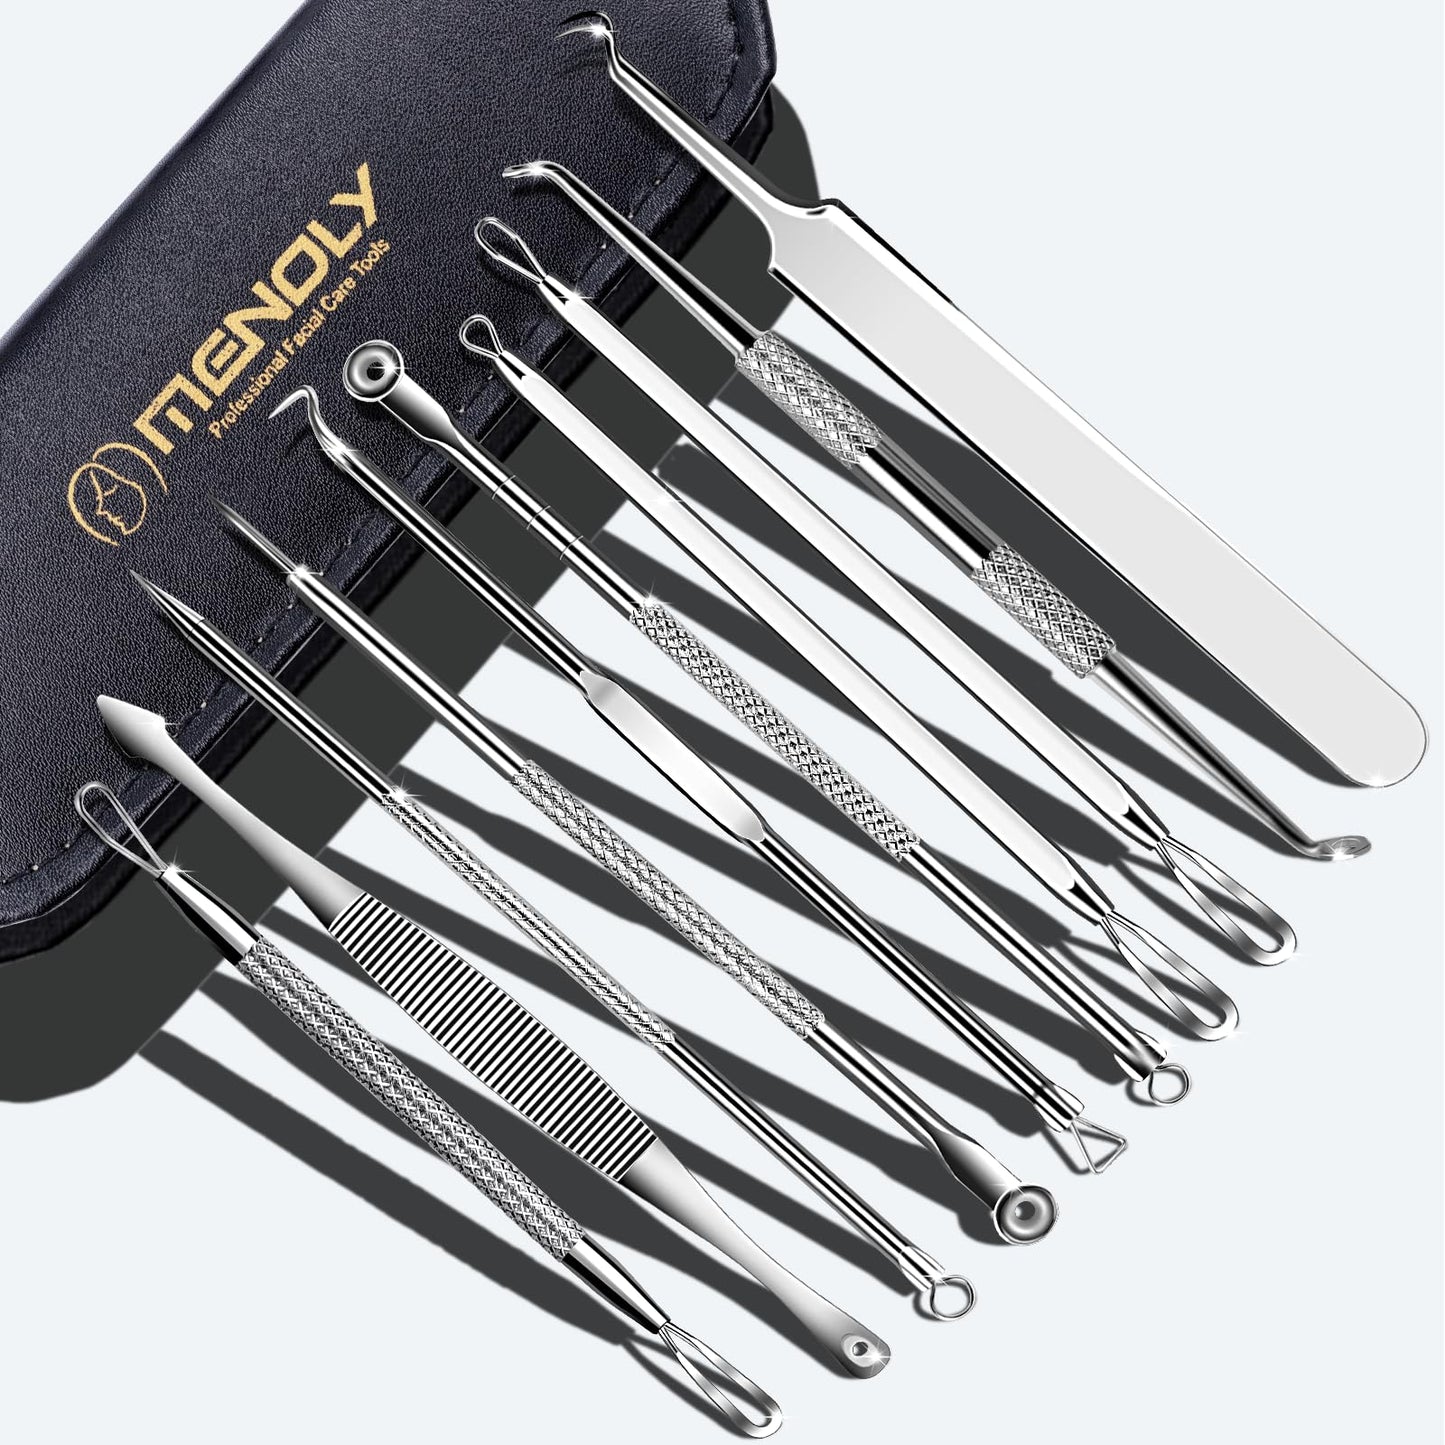 MENOLY Pimple Popper Tool Kit, 10 Pcs Blackhead Remover Zit Popper for Blemish, Pimple Comedone Extractor Acne Tool for Nose Face with a Leather Bag